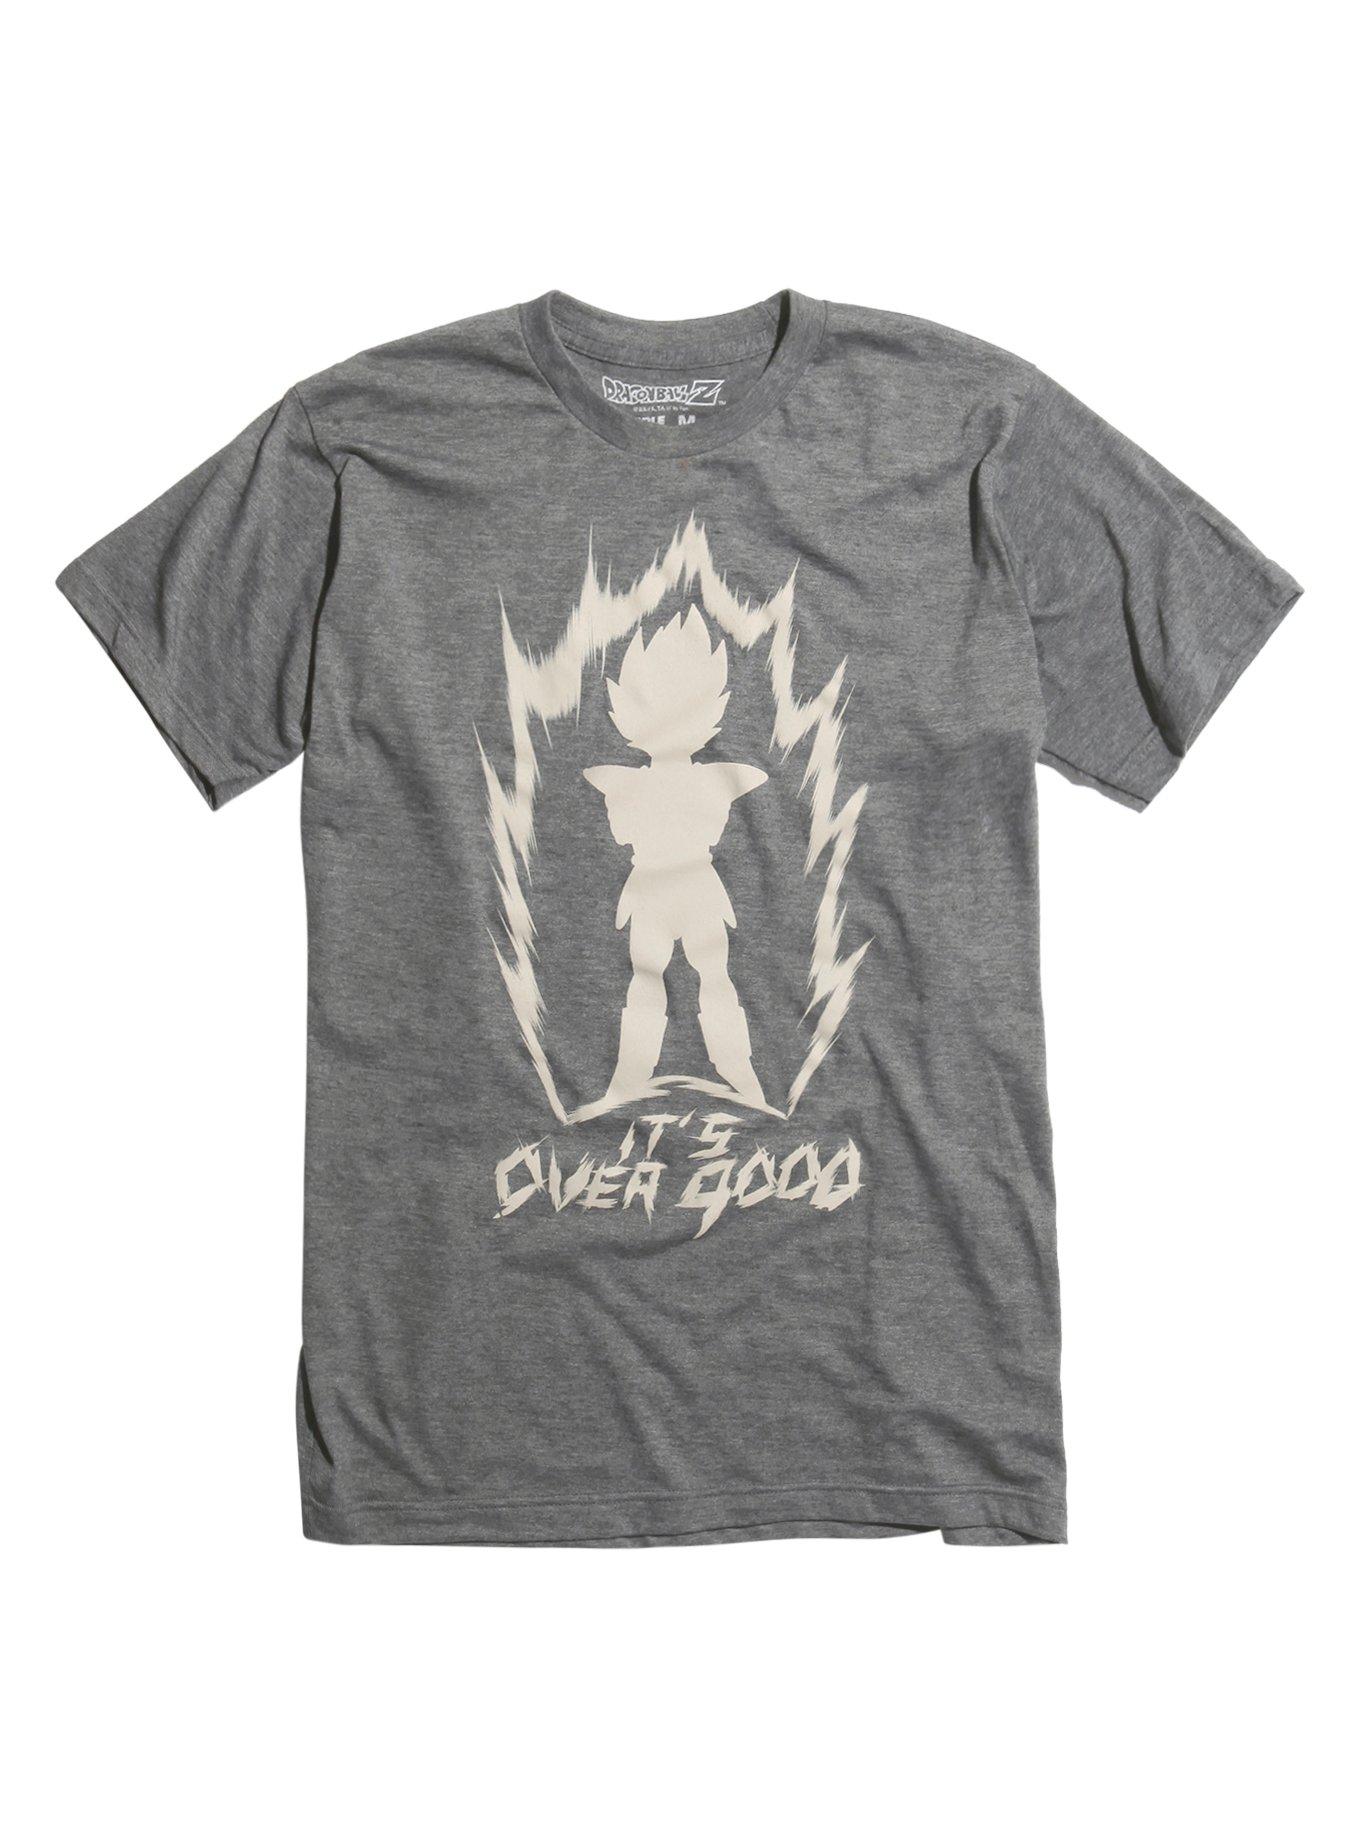 Dragon Ball Z It's Over 9000! Silhouette T-Shirt, GREY, hi-res